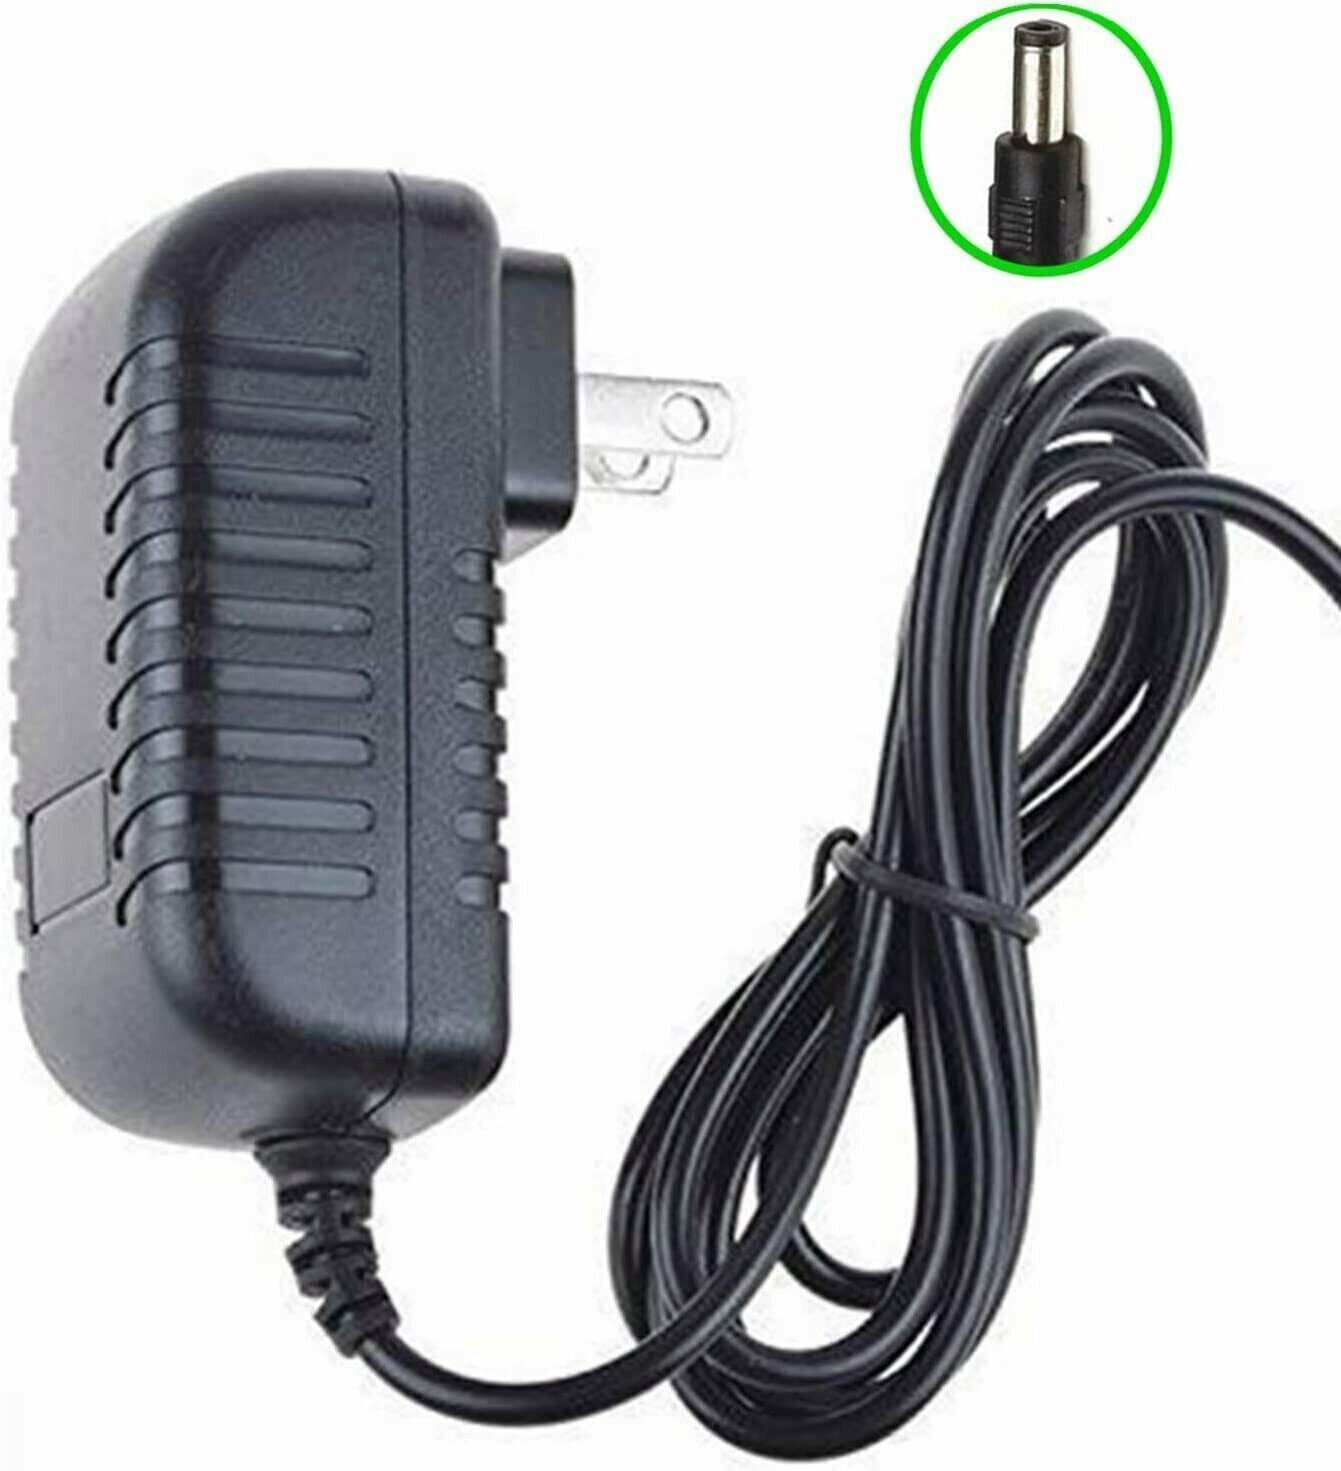 Kircuit AC/DC Adapter Replacement For Black & Decker GC1800 GCO1800 GC180WD  18 Volts B&D 18Vdc GC 1800 Type 2 10mm 18V DC Cordless Drill GC01800 BD B&D  HPC18 Slide Pack 